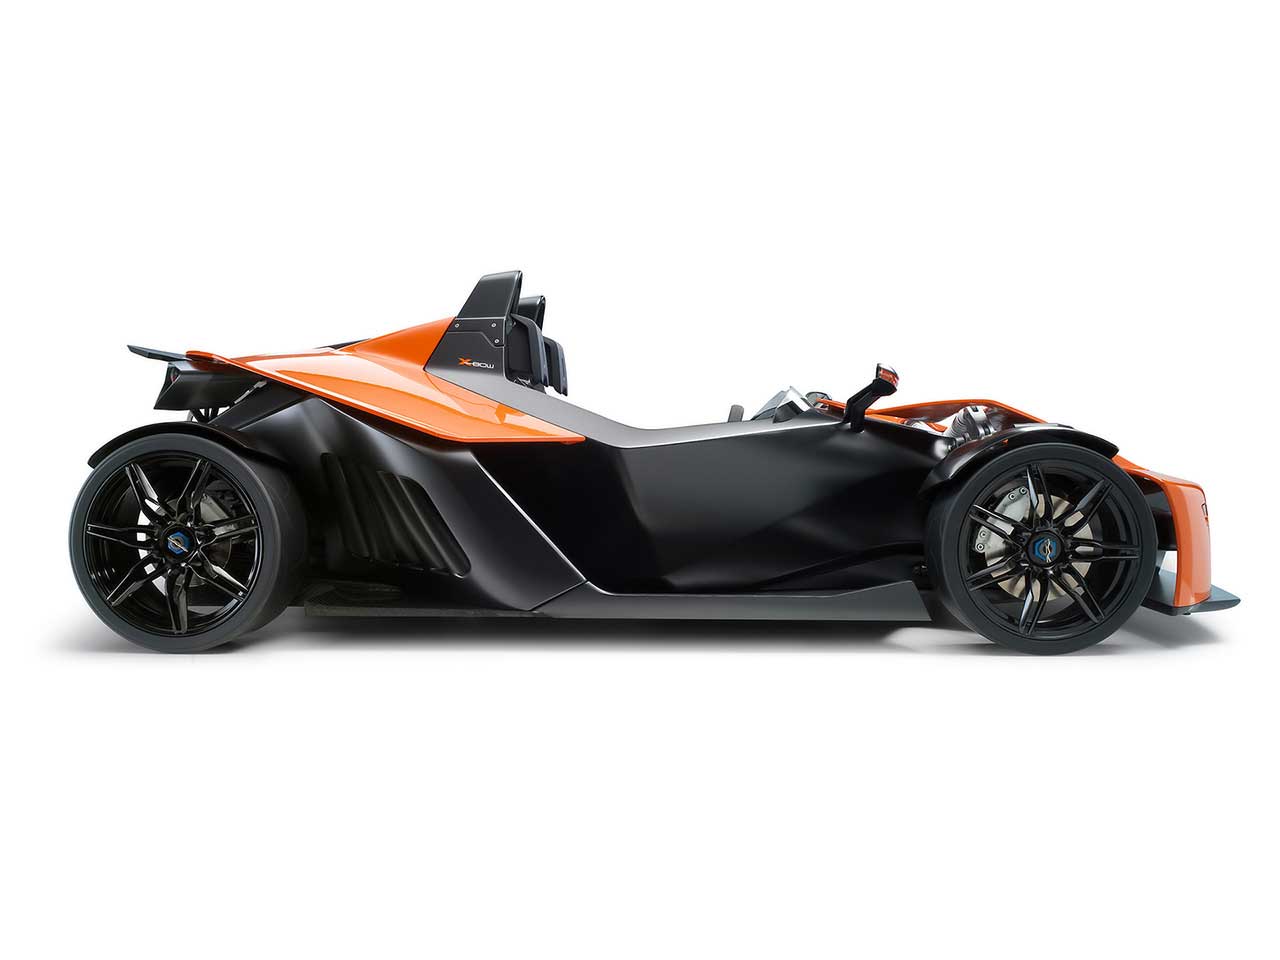 KTM X Bow R side view[